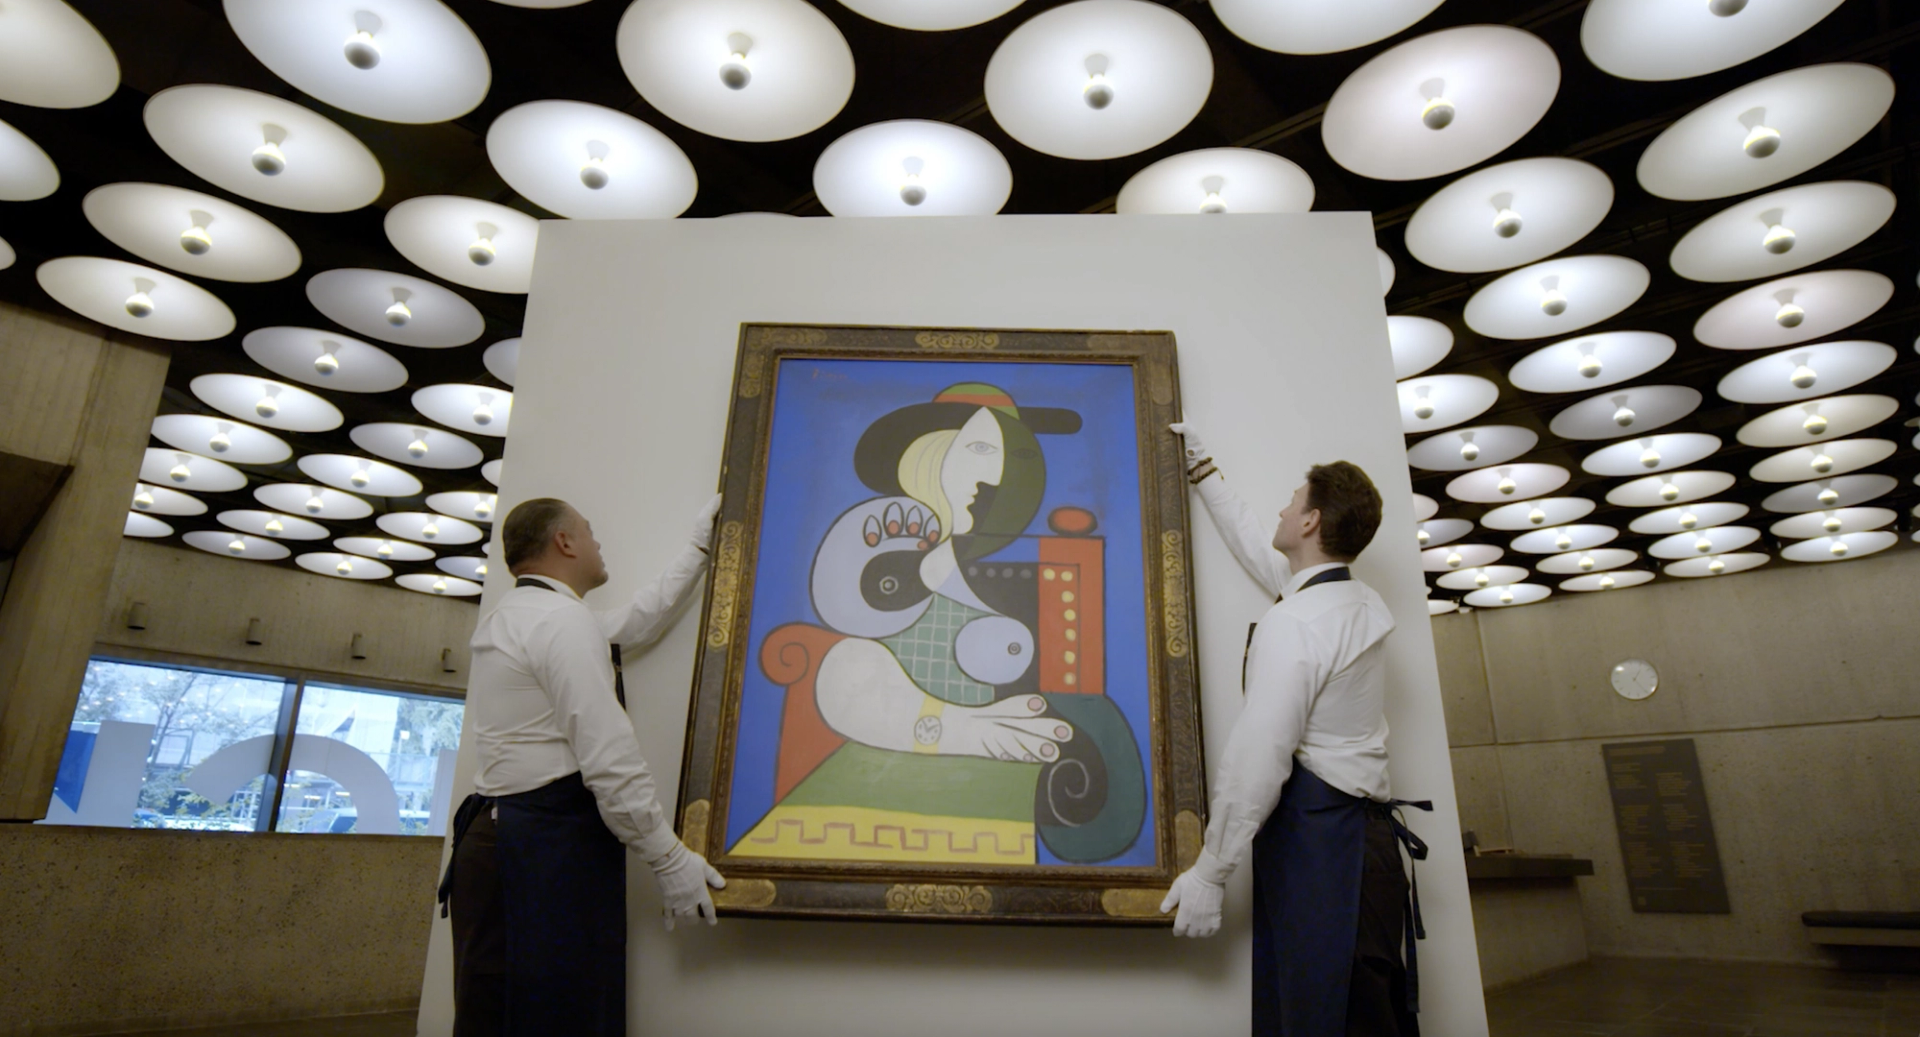 Two men are shown hanging up Picasso's work on a white wall.